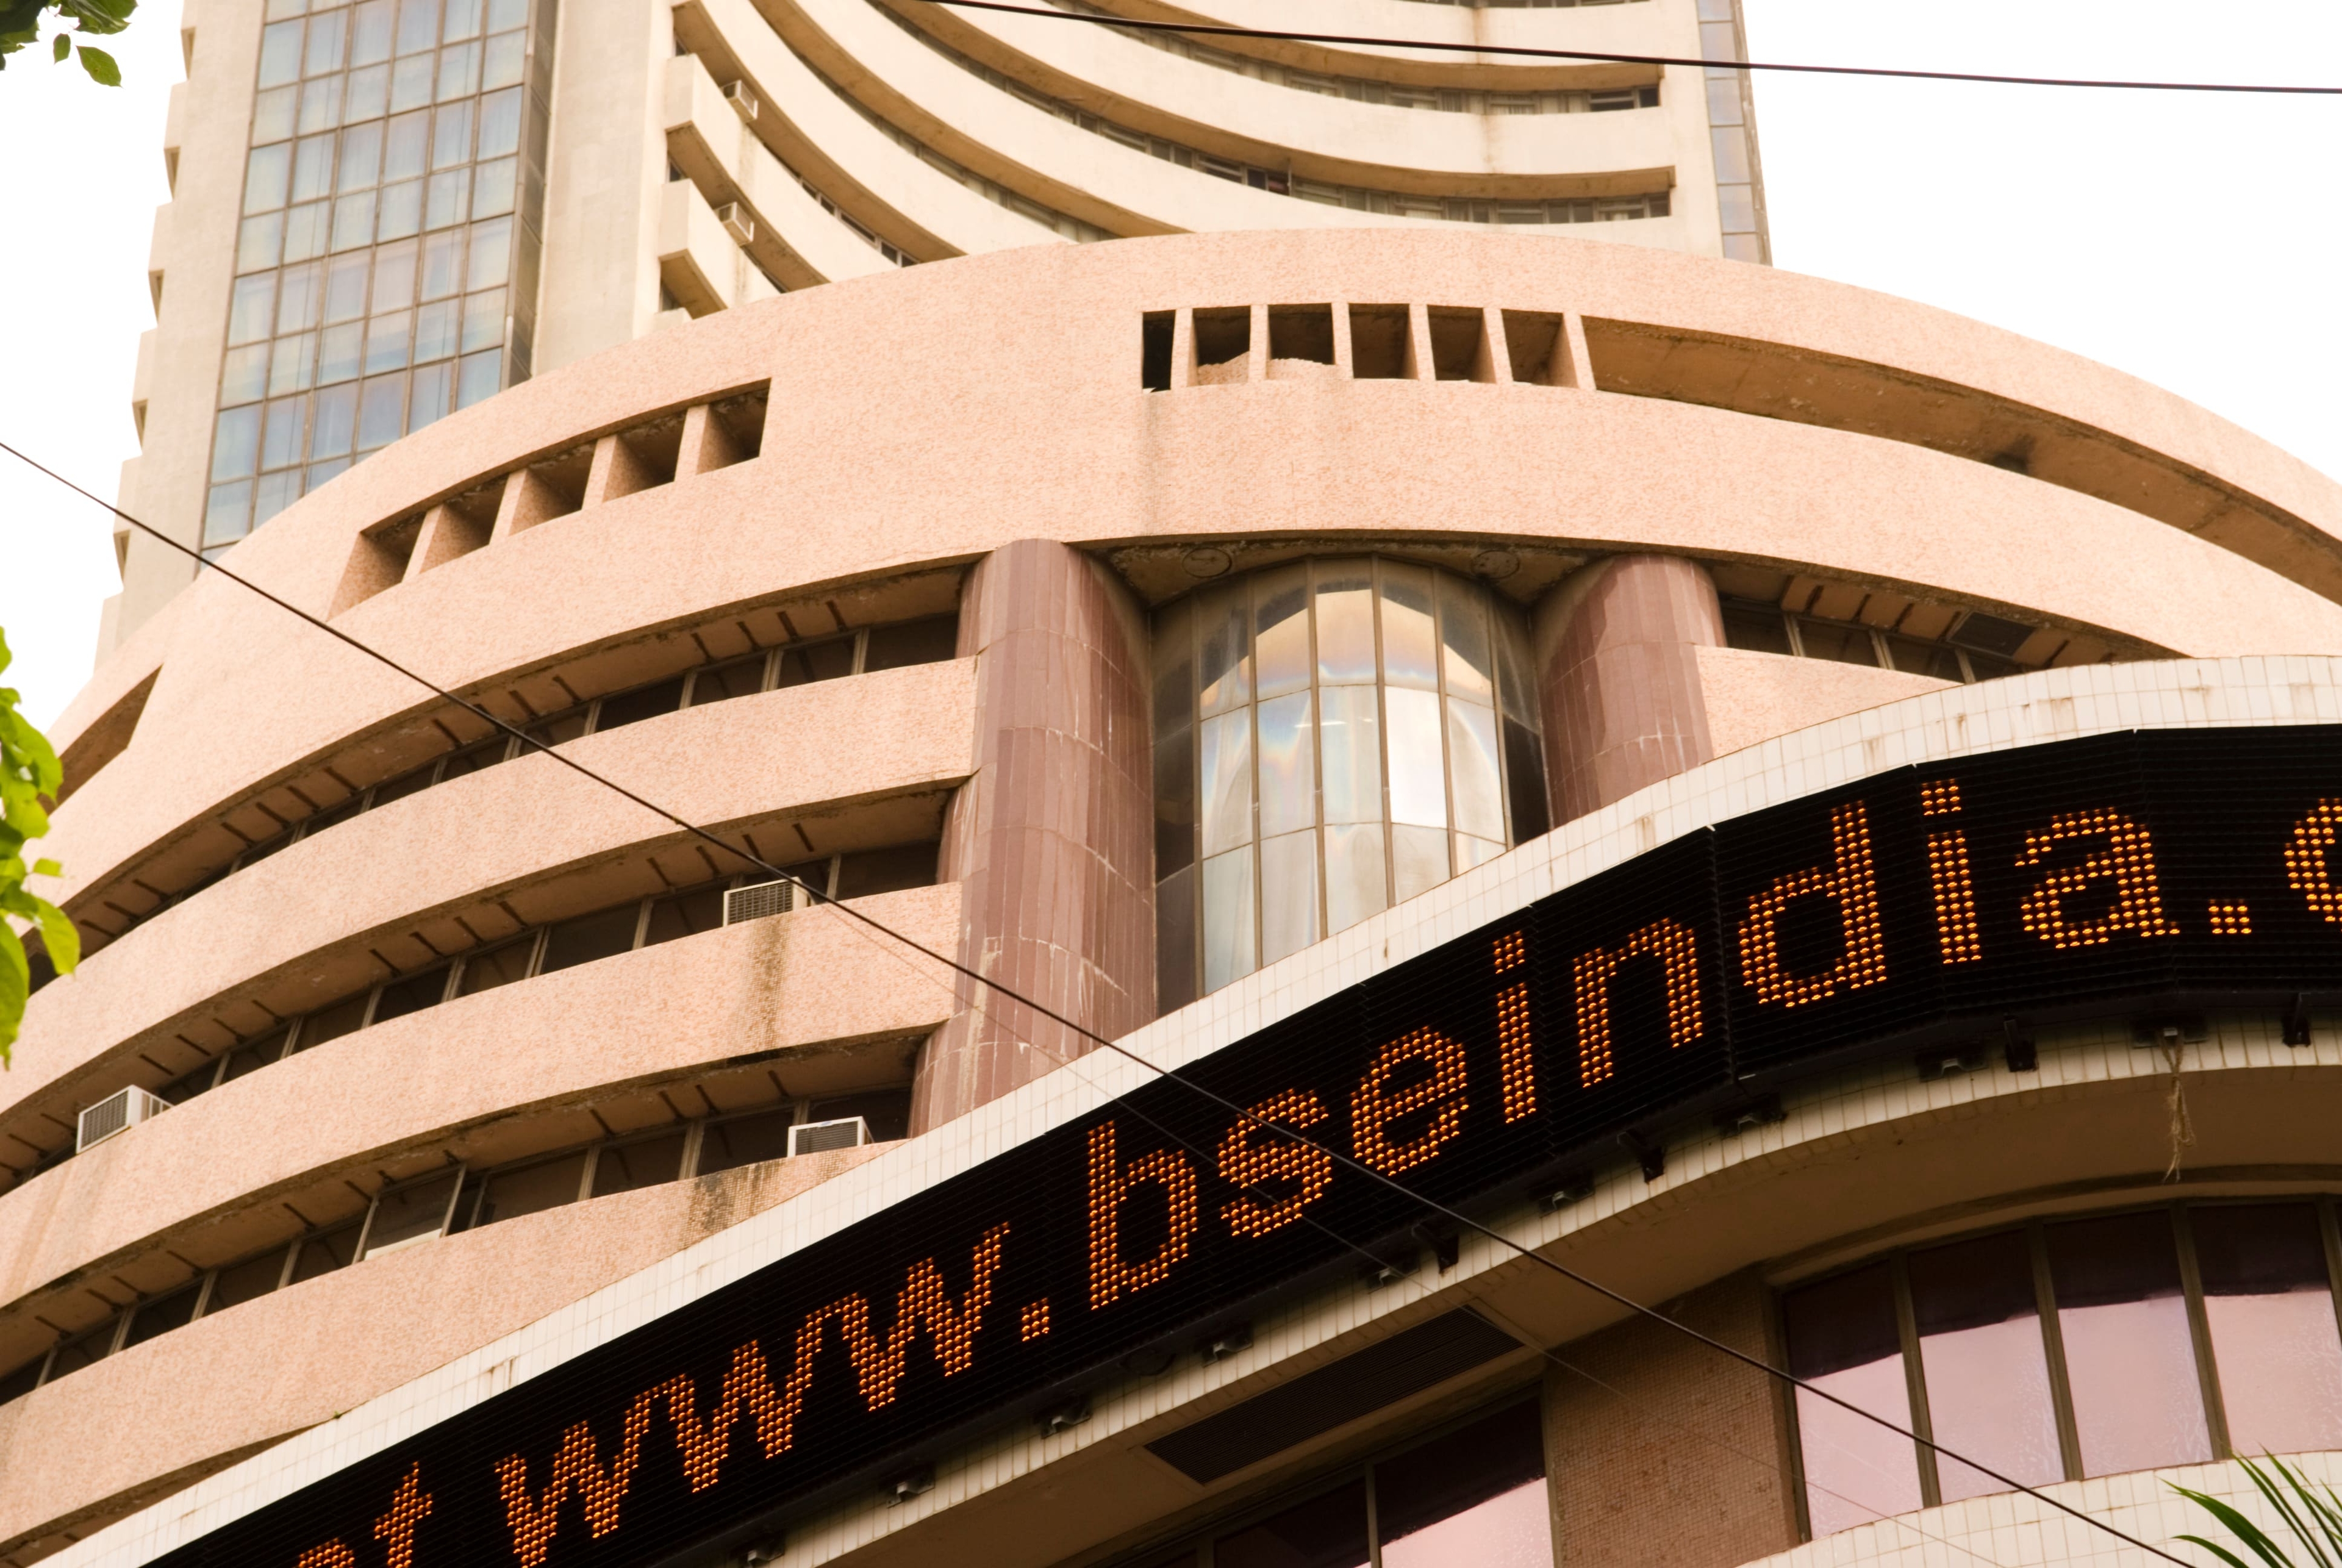 Indian market traded volatile on March 23 as equity benchmarks the Sensex and the Nifty ended in the red after trading in the green in the first half of the session. Equity barometer the Sensex opened more than 200 points higher at 58,198.64 but ended 304 points, or 0.53 percent, lower at 57,684.82. In intraday trade, the Sensex swung by 848 points. Nifty ended the day at 17,245.65, down 70 points, or 0.40 percent. Volatility index India VIX climbed 2.81 percent to 24.75.